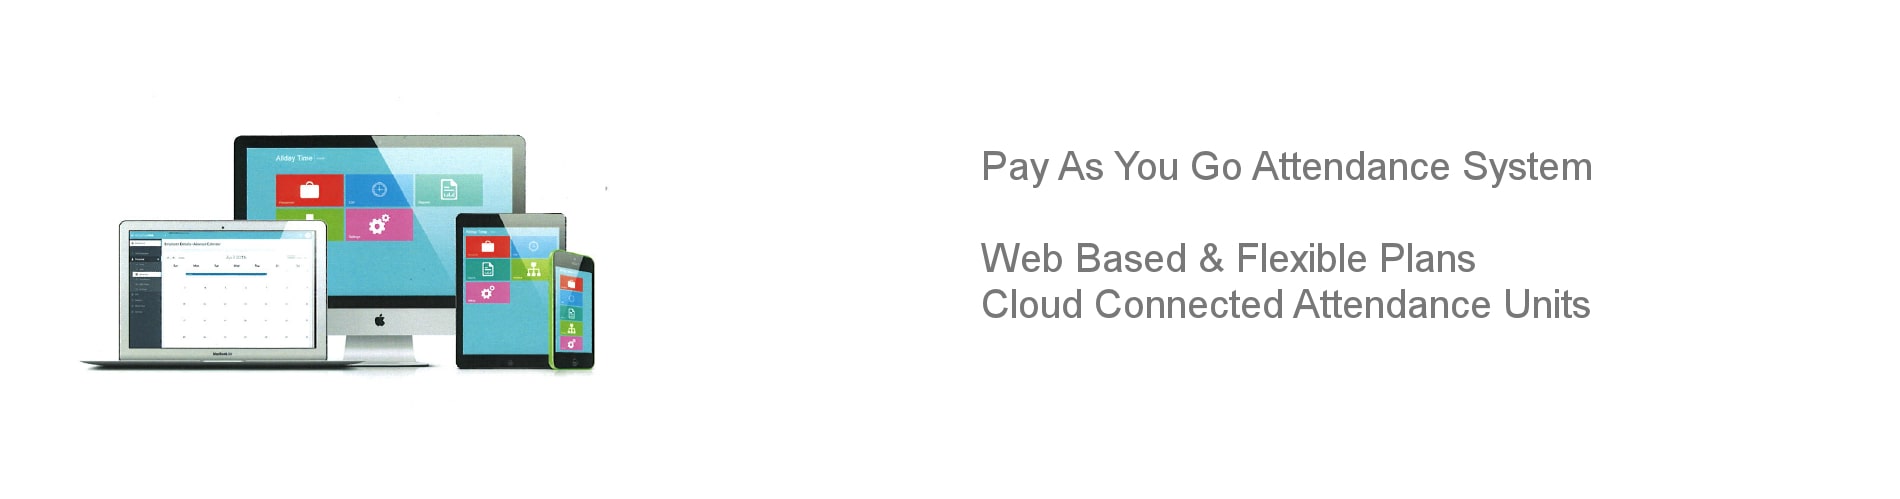 pay as you go cloud attendance